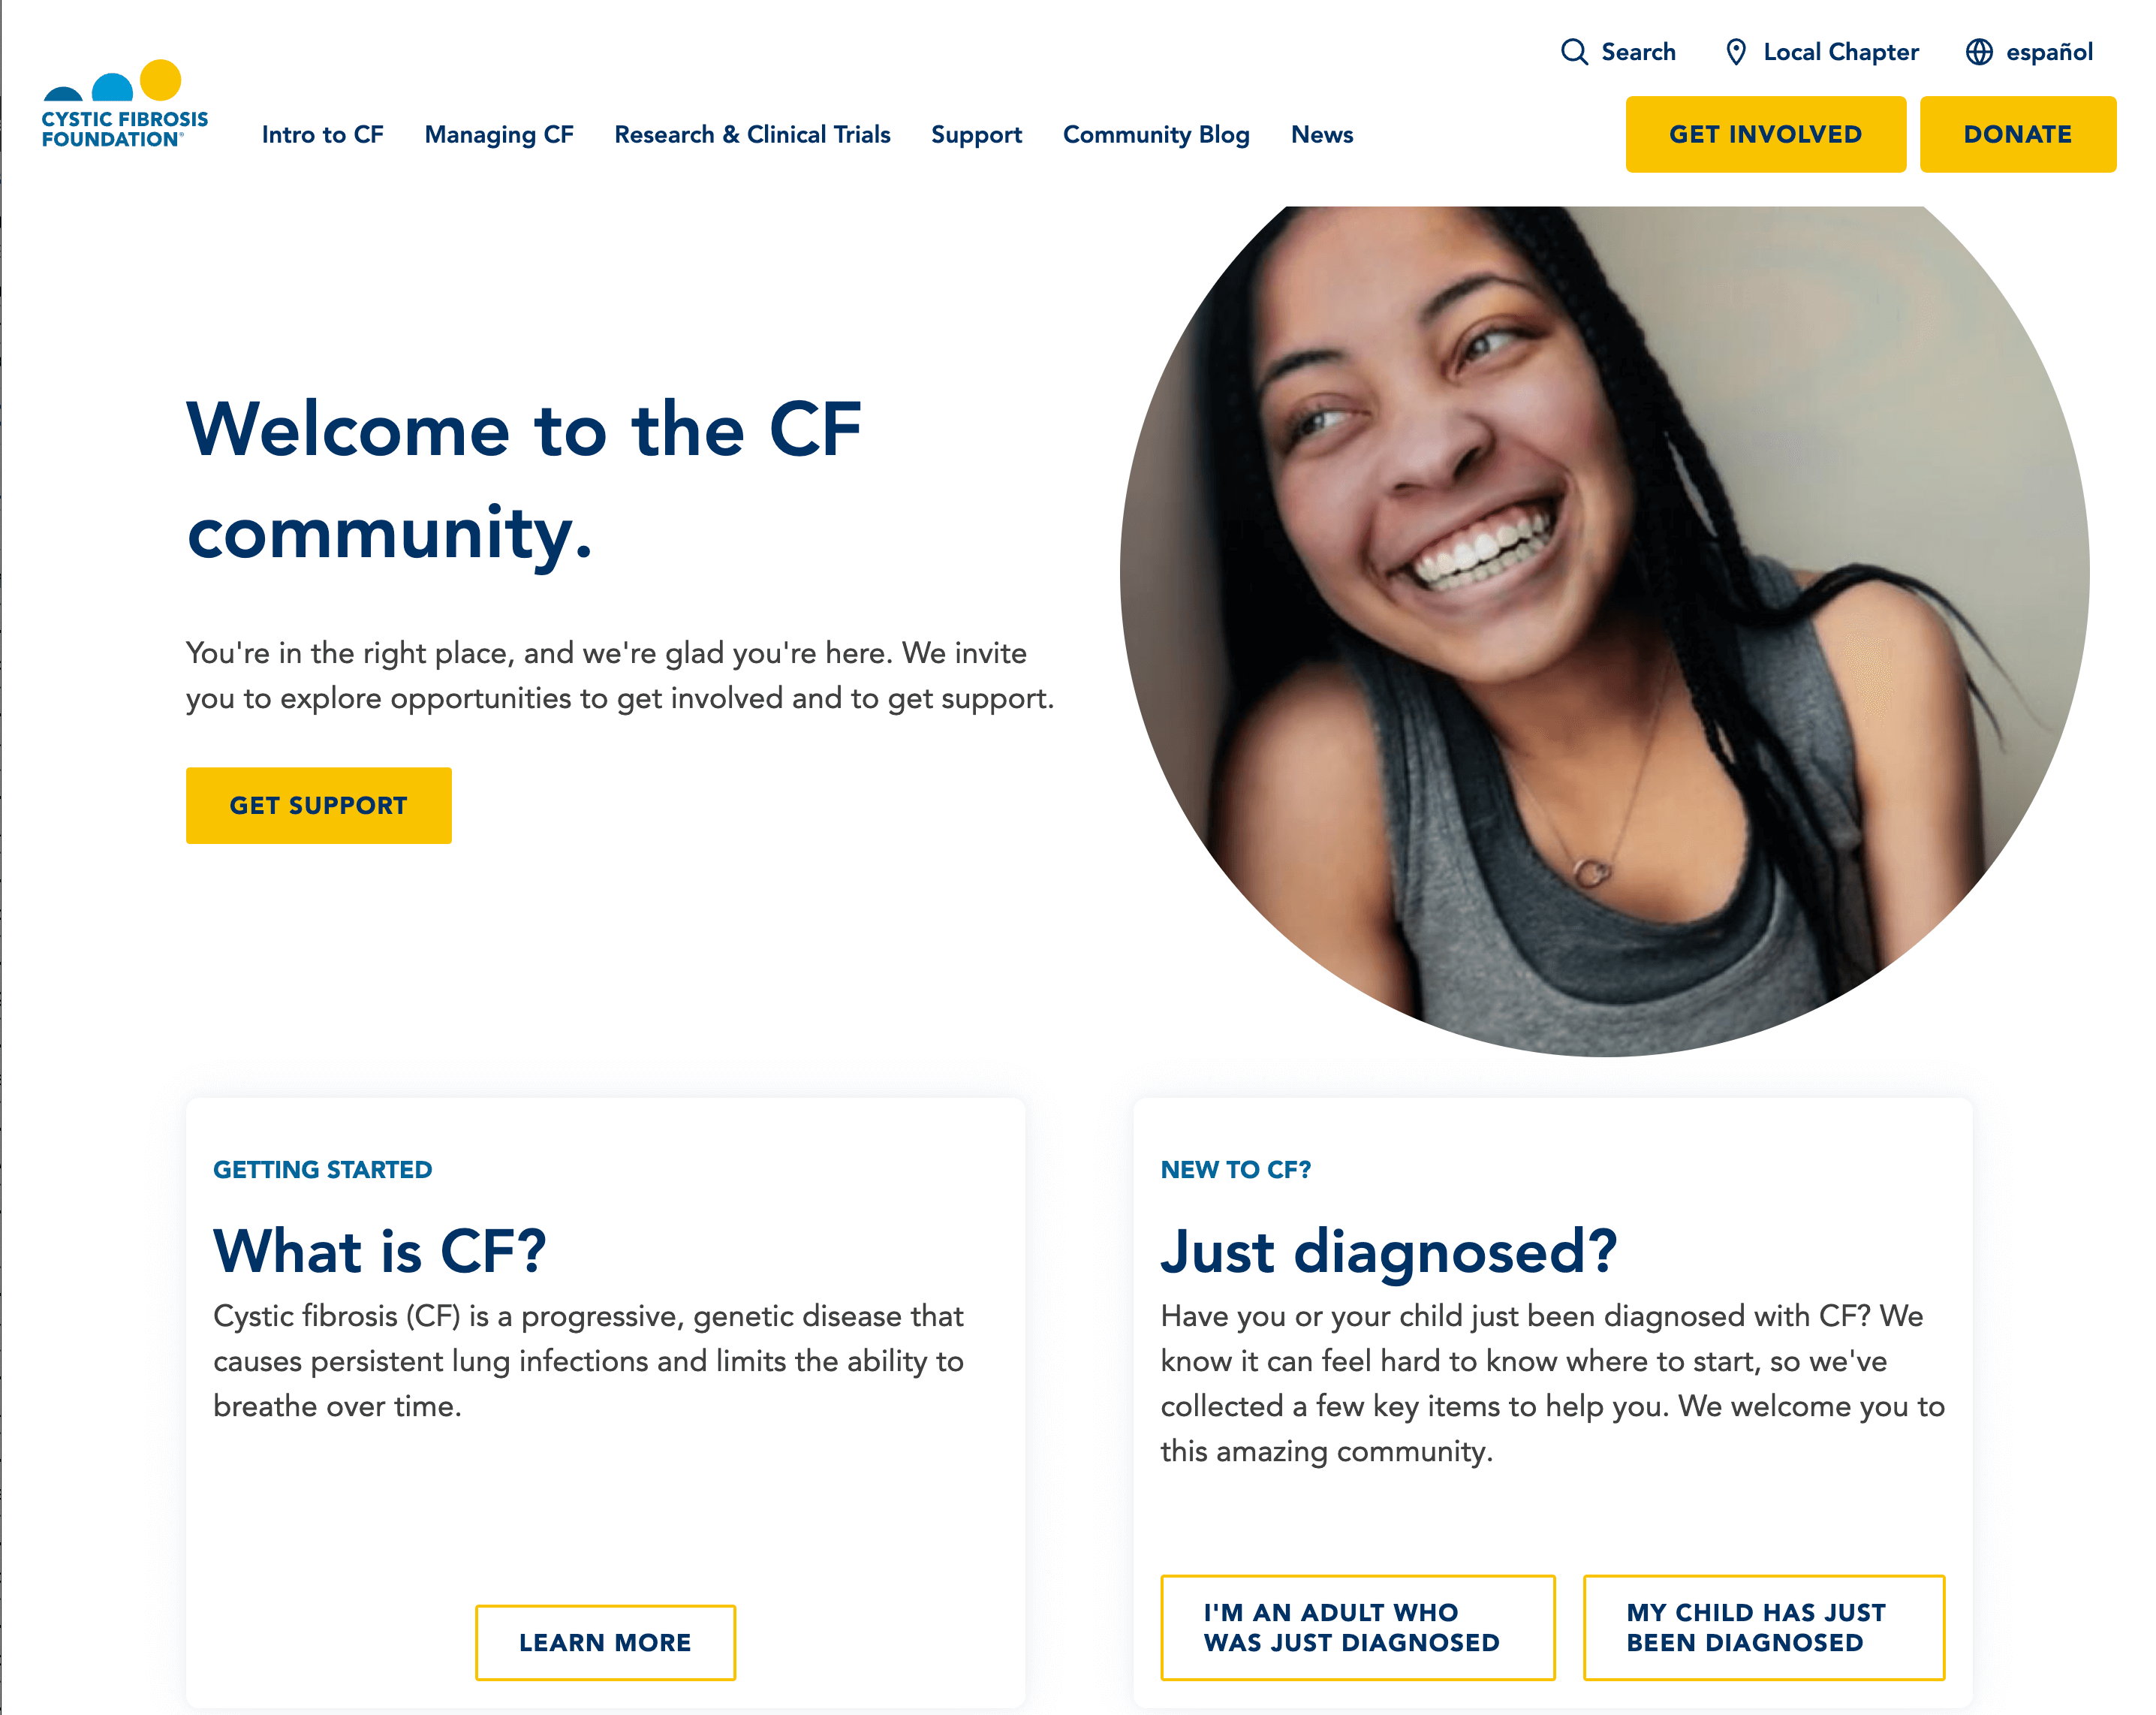 The Cystic Fibrosis Foundation's homepage